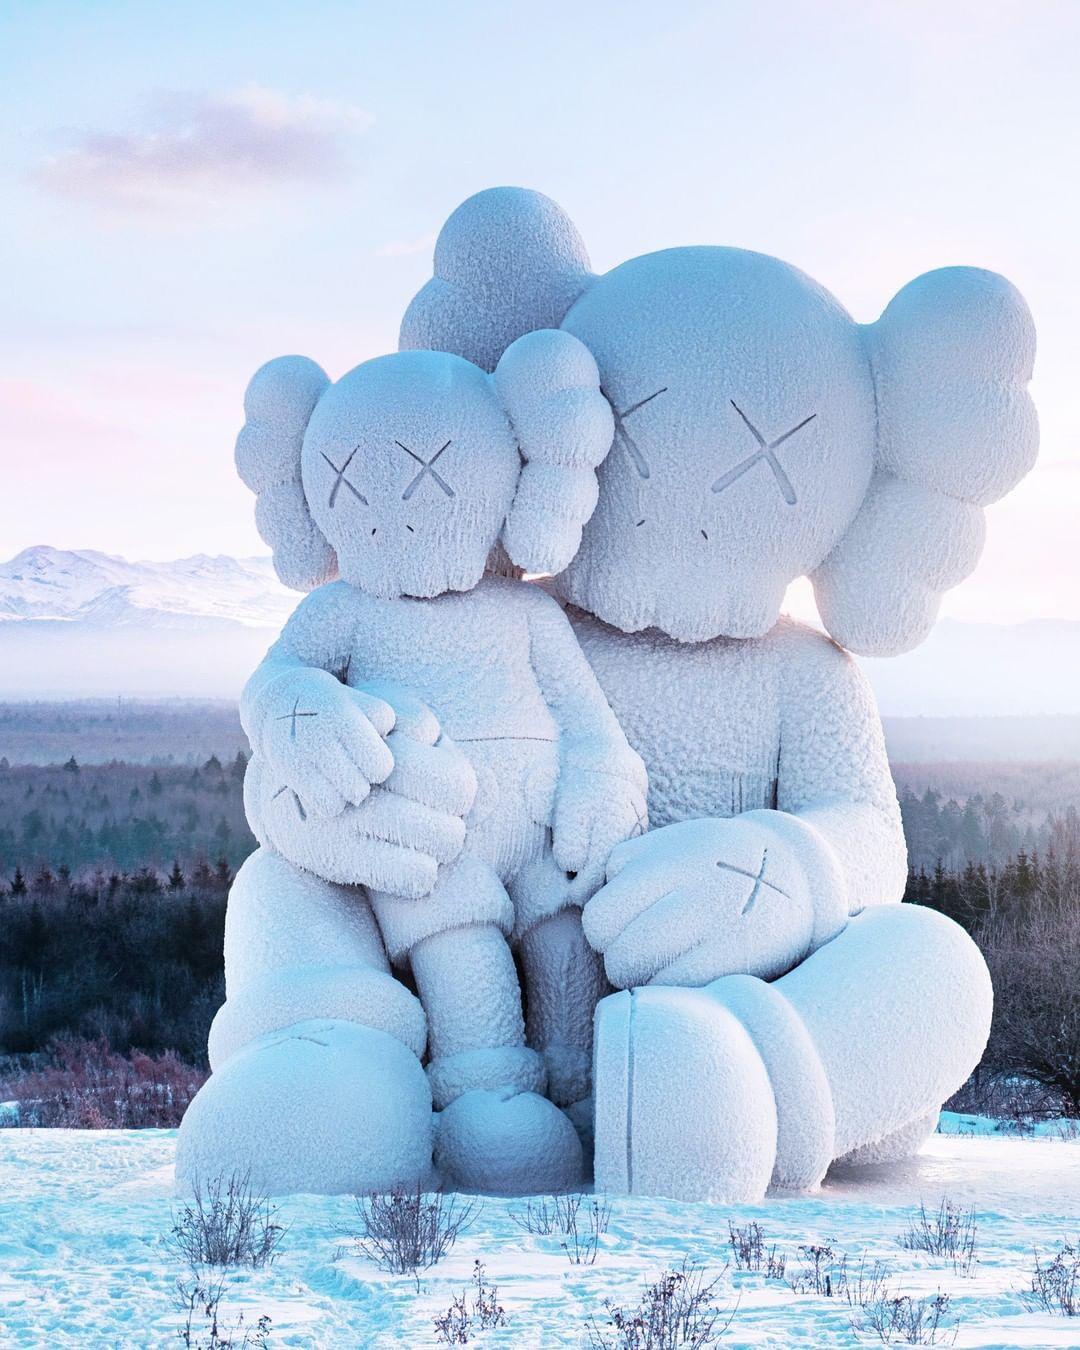 Released as a special edition in Korea in conjunction with the Snowy Mountain installation (pictured)
Set of 3 Sculptures in Original Packaging and Sealed
Unused, Undisplayed, and Authentic
Stands 8.5 inches tall each!